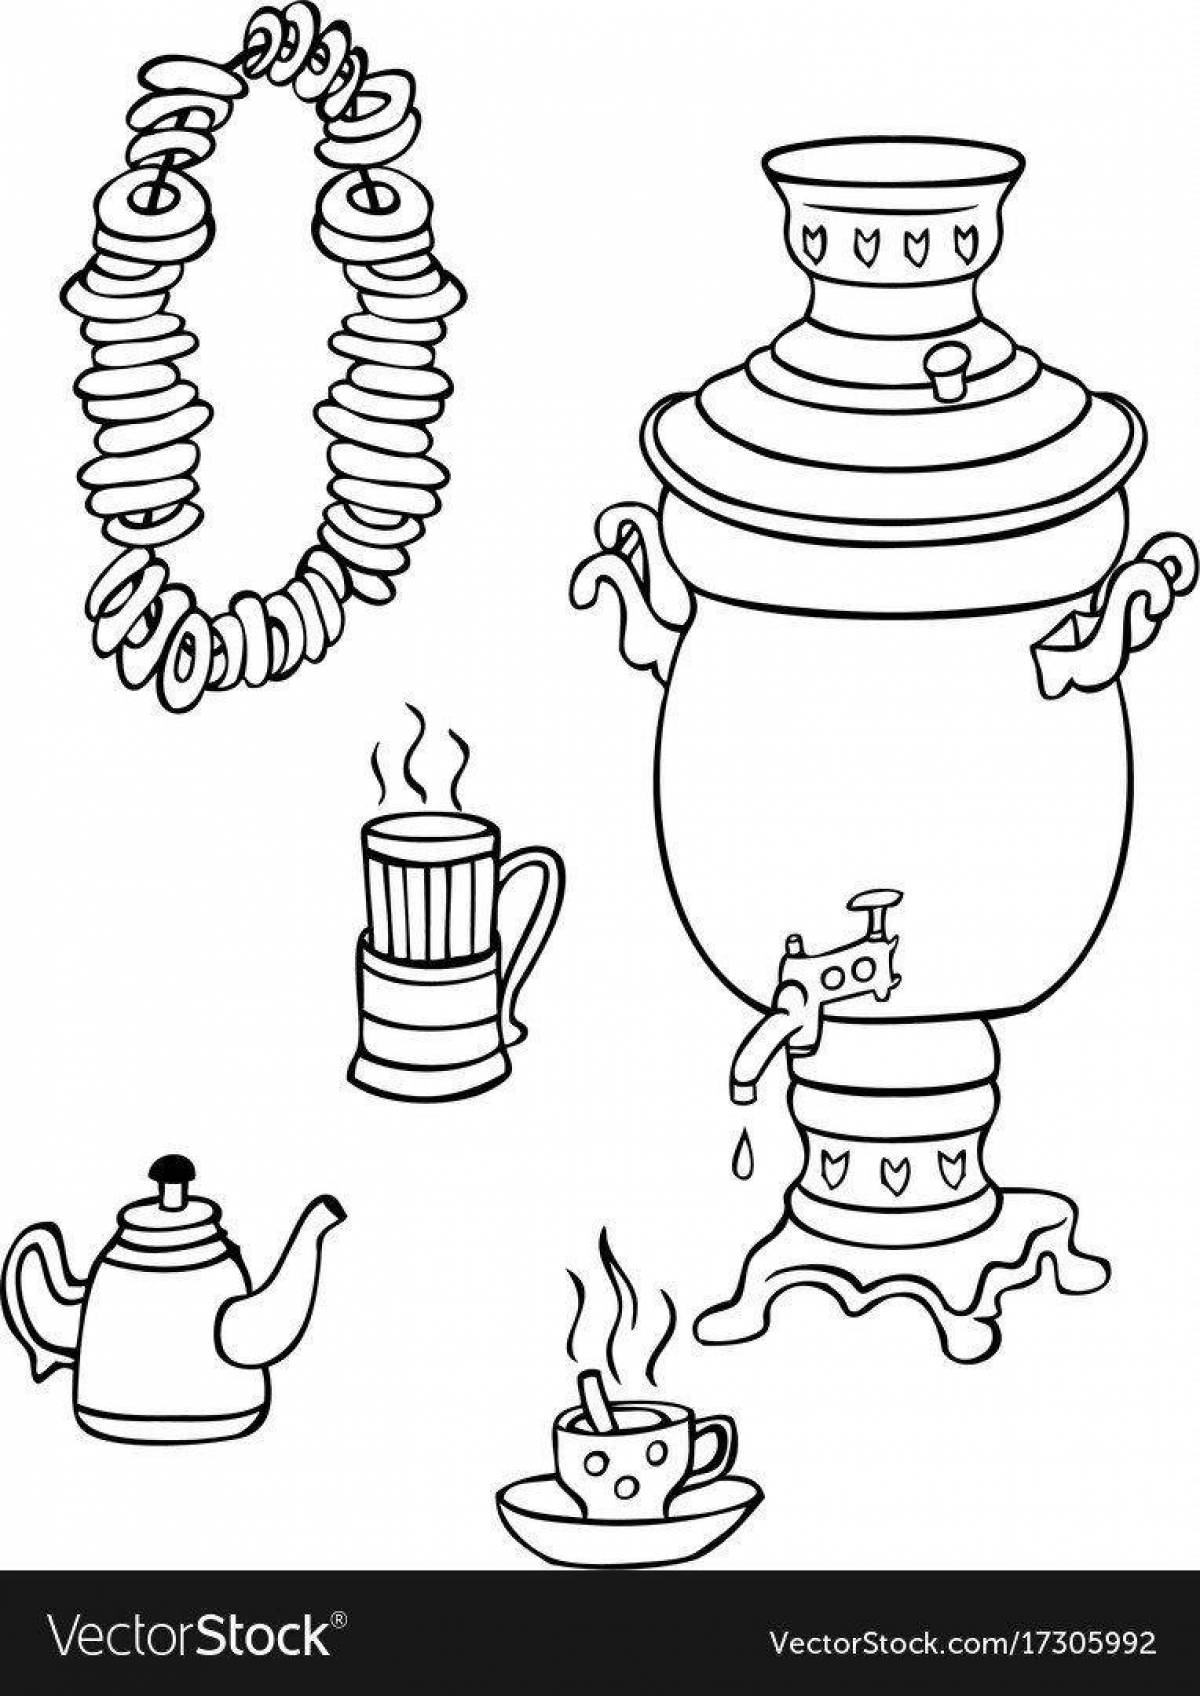 Coloring page samovar with spectacular pattern